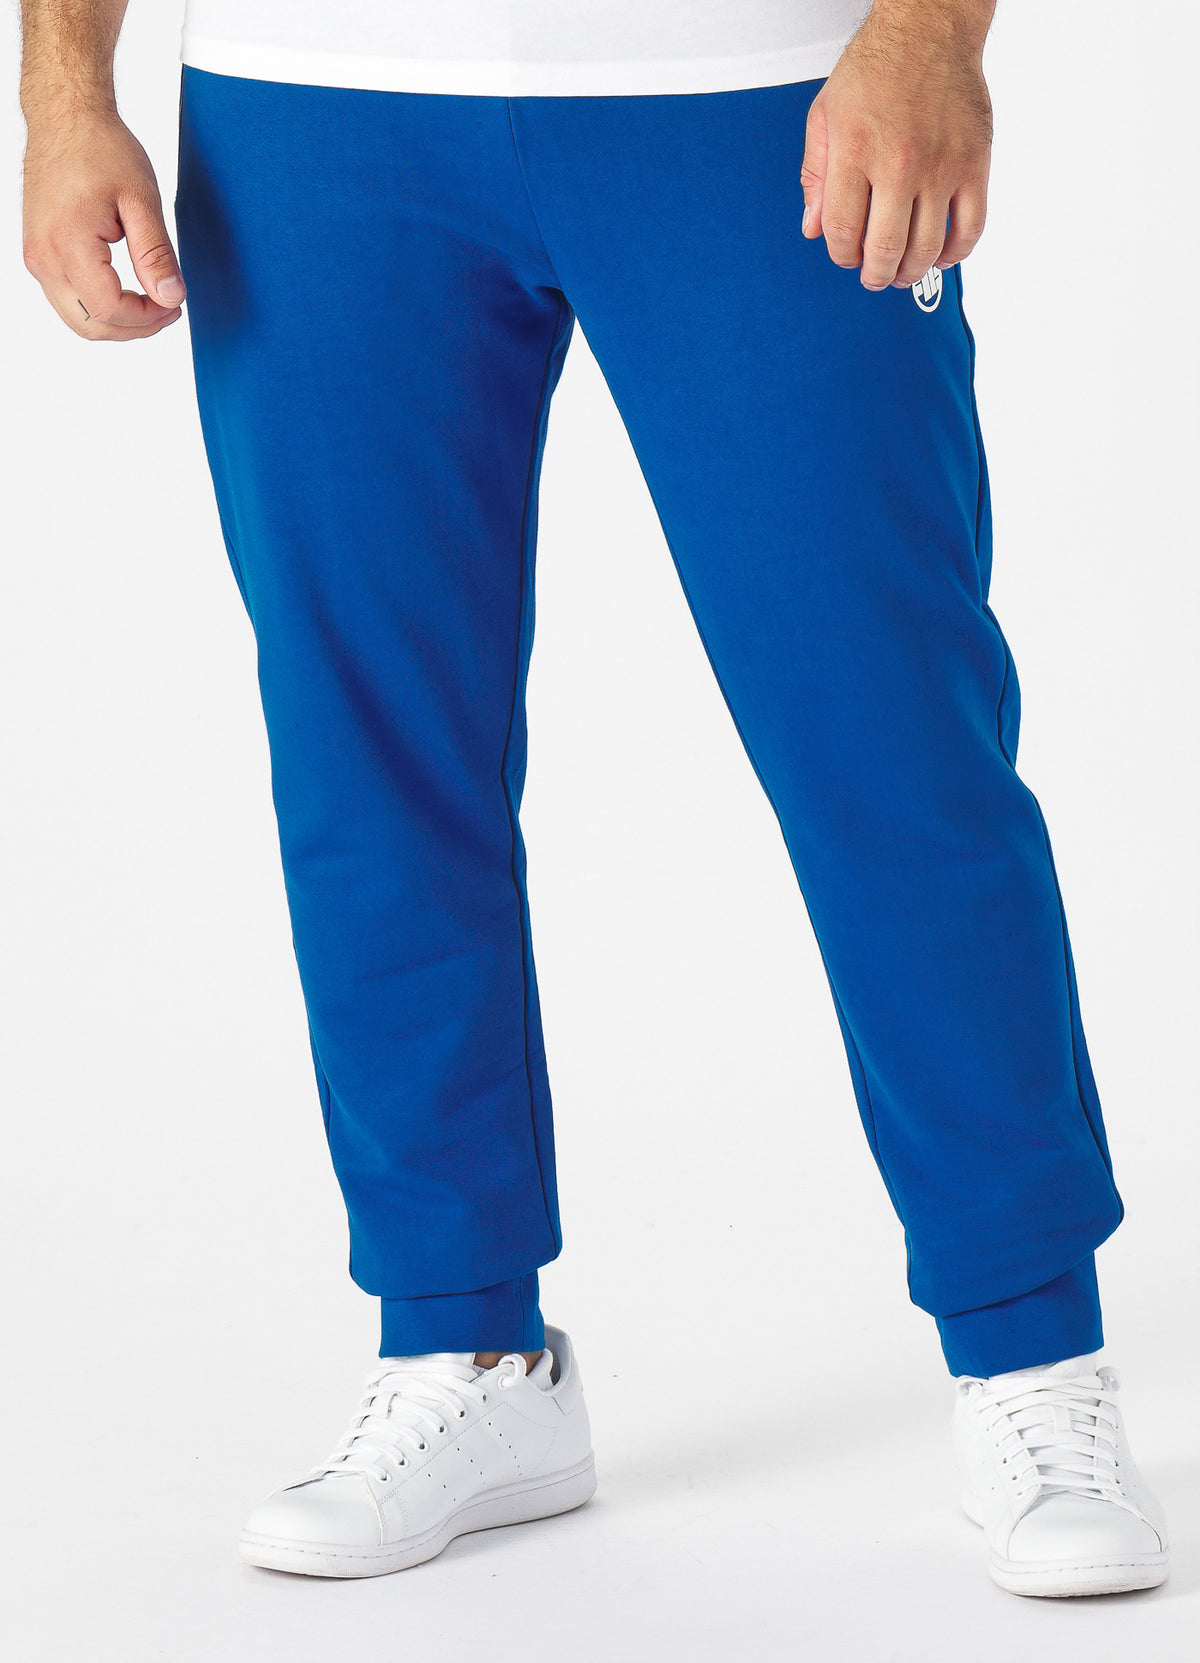 TERRY NEW LOGO Blue Track Pants.